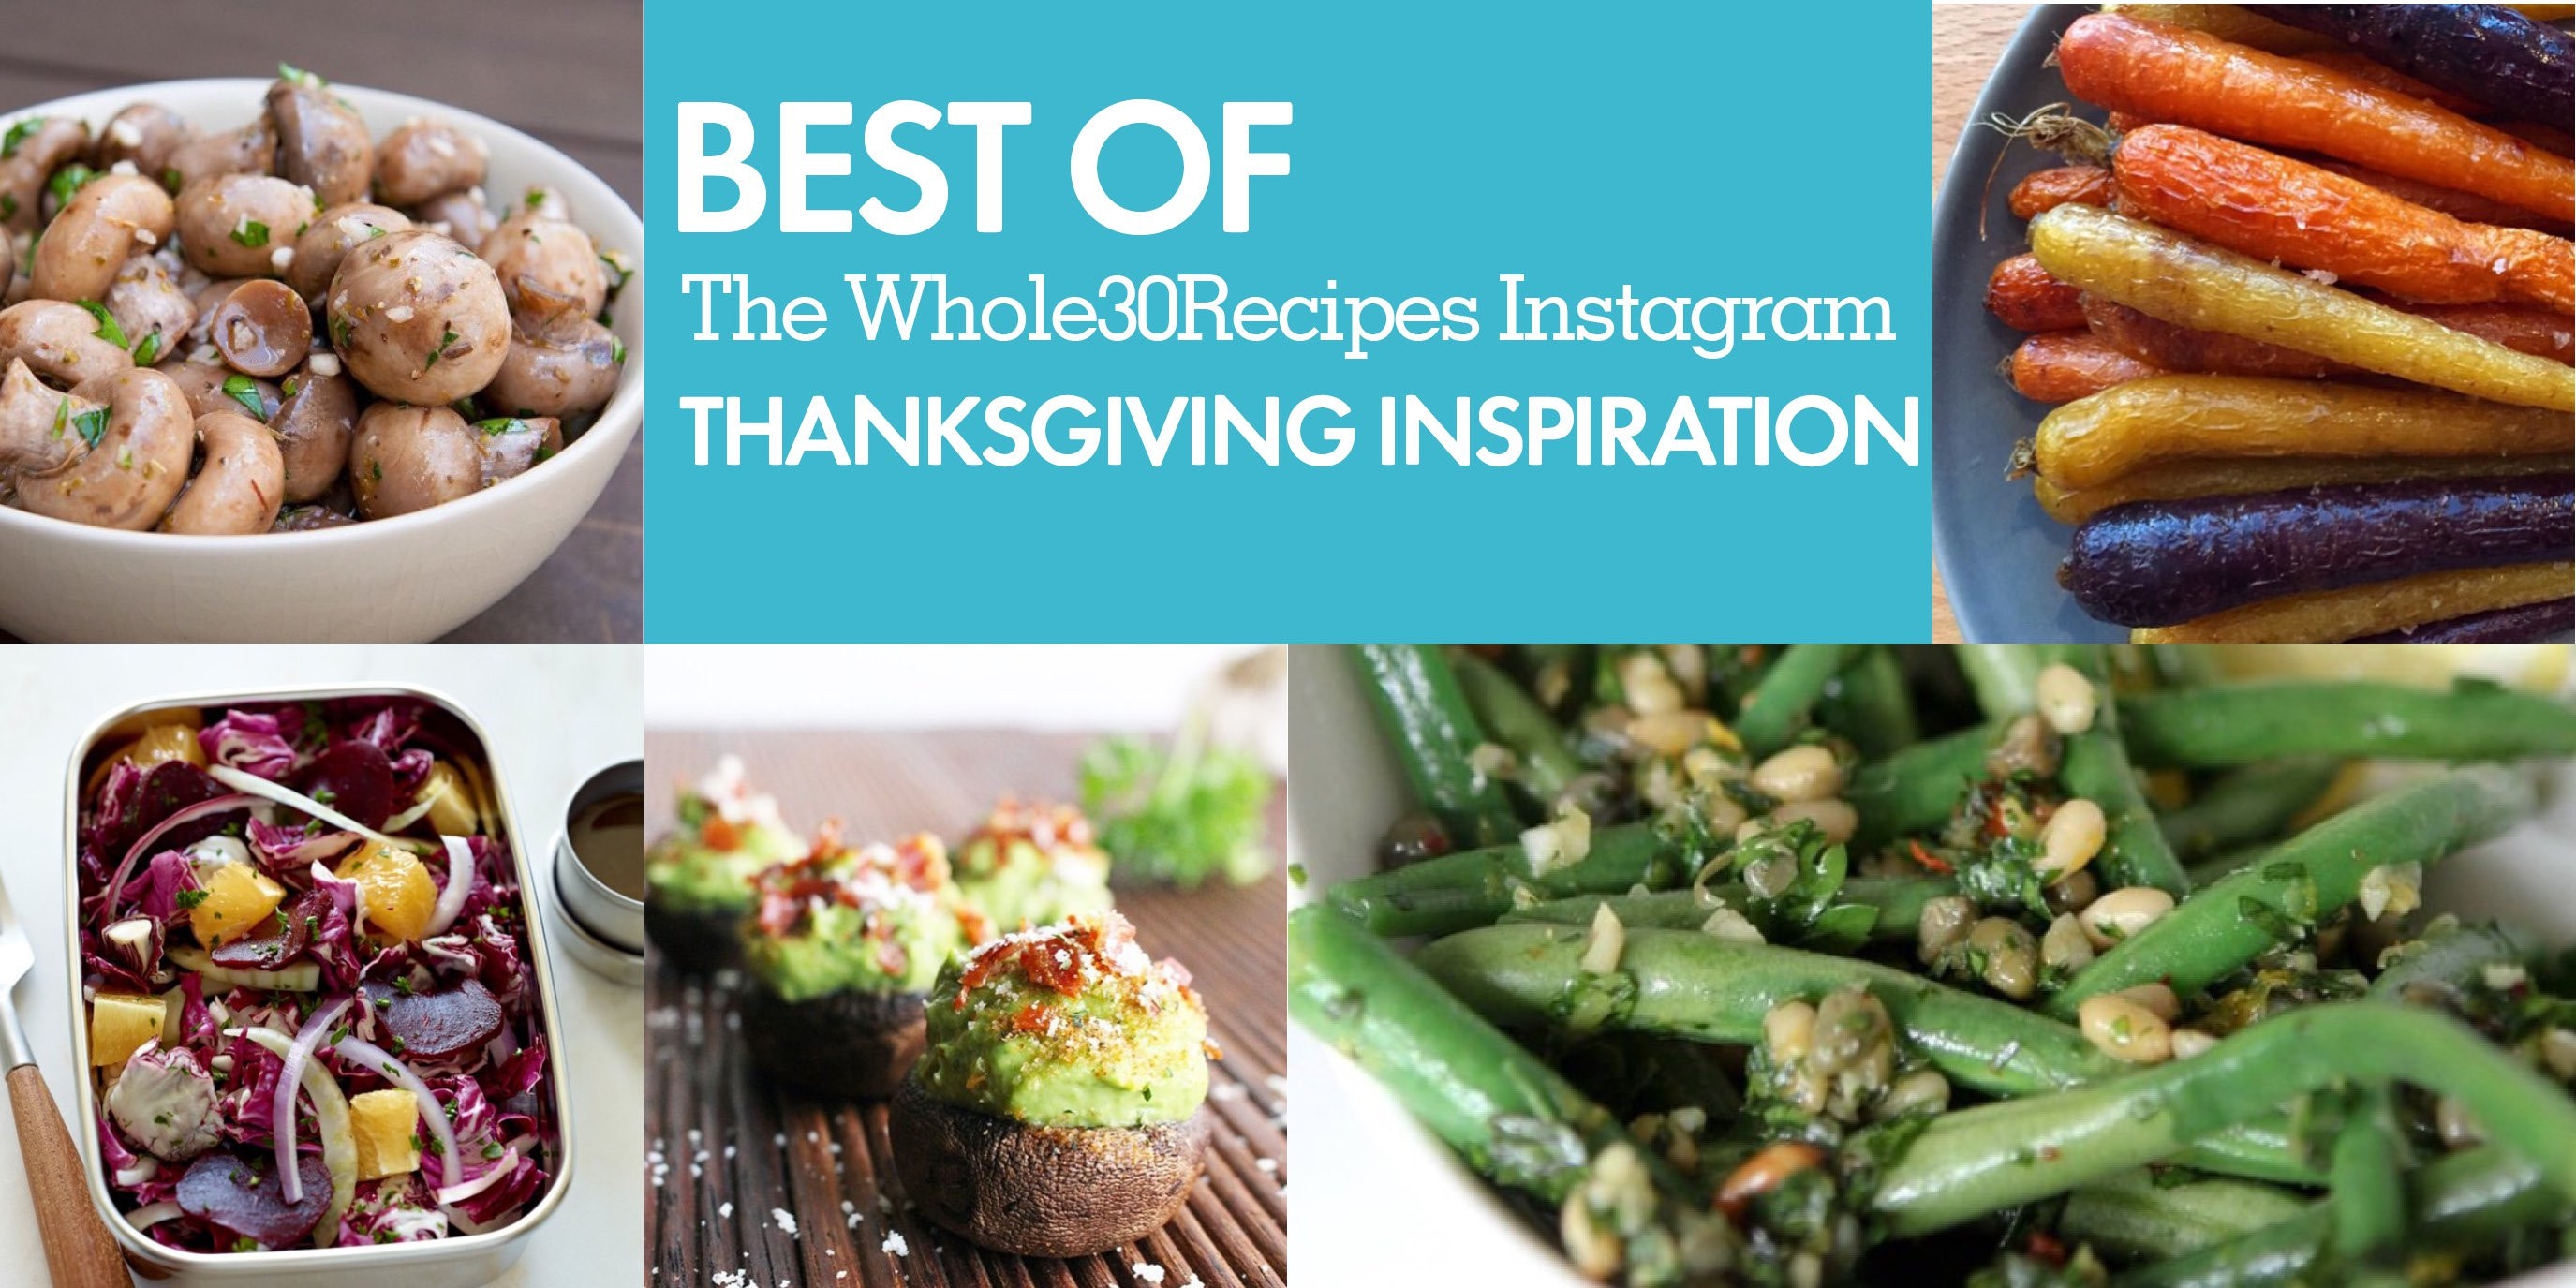 Whole30 Thanksgiving Recipes
 Best of Whole30 Recipes Thanksgiving Inspiration